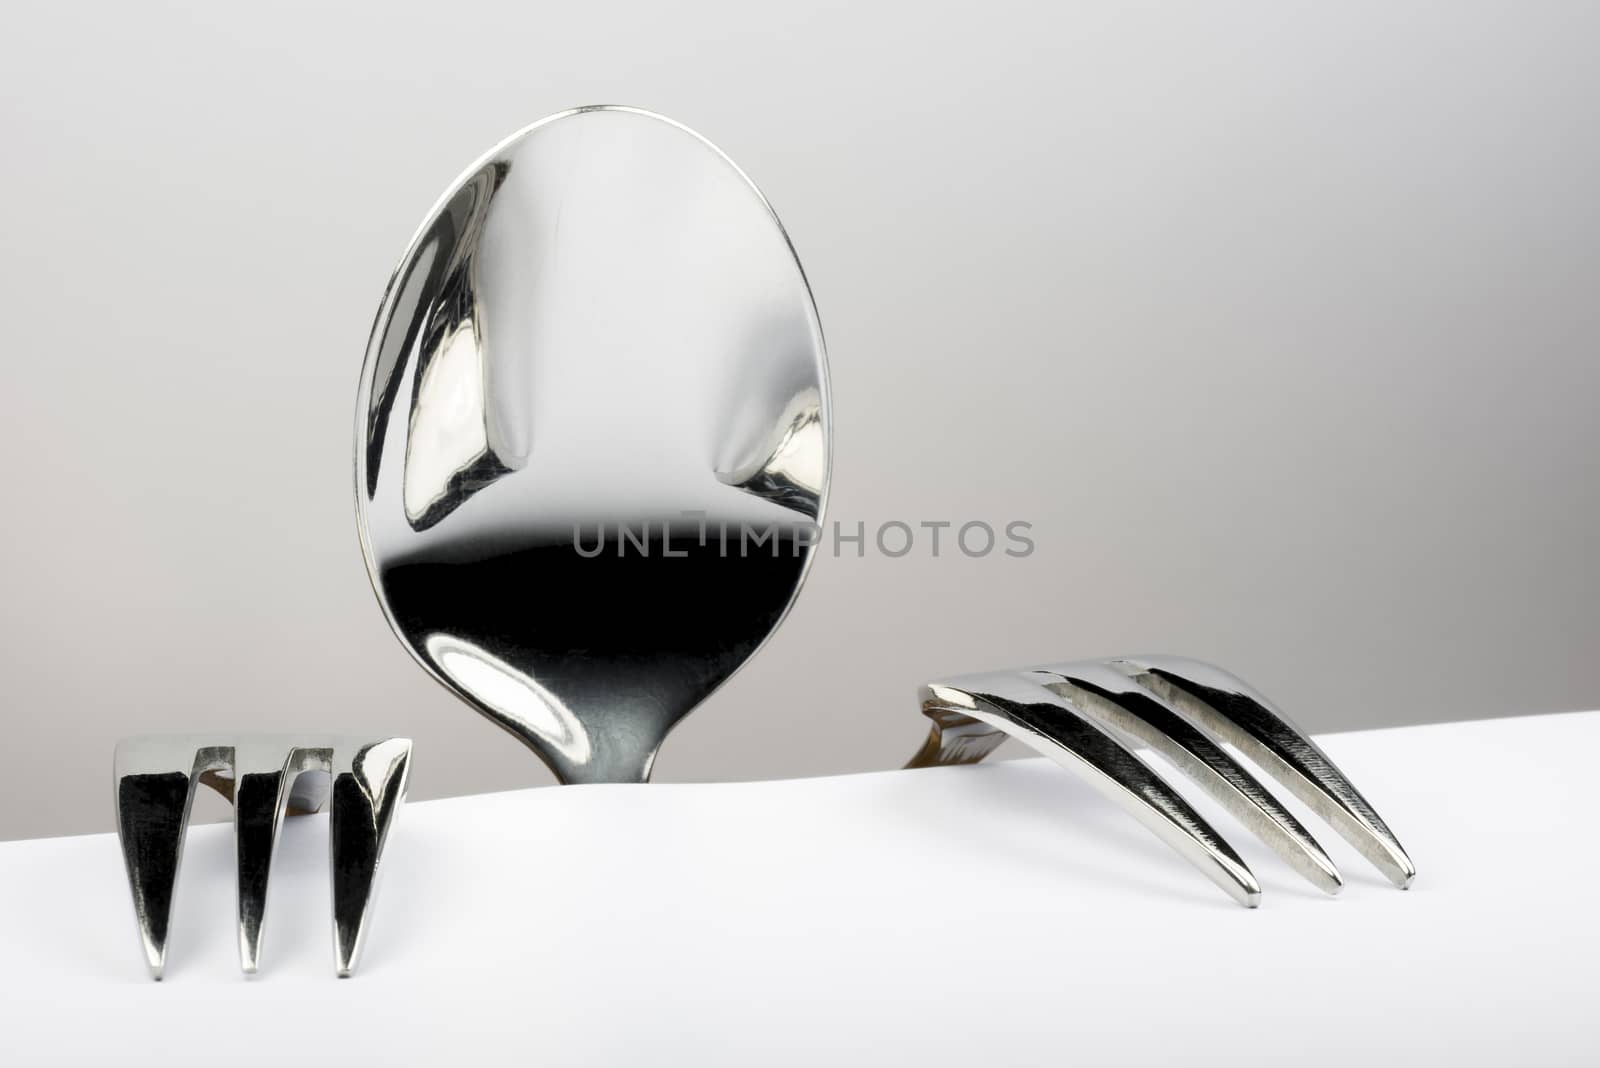 Figure of spoon and two forks
 by Tofotografie